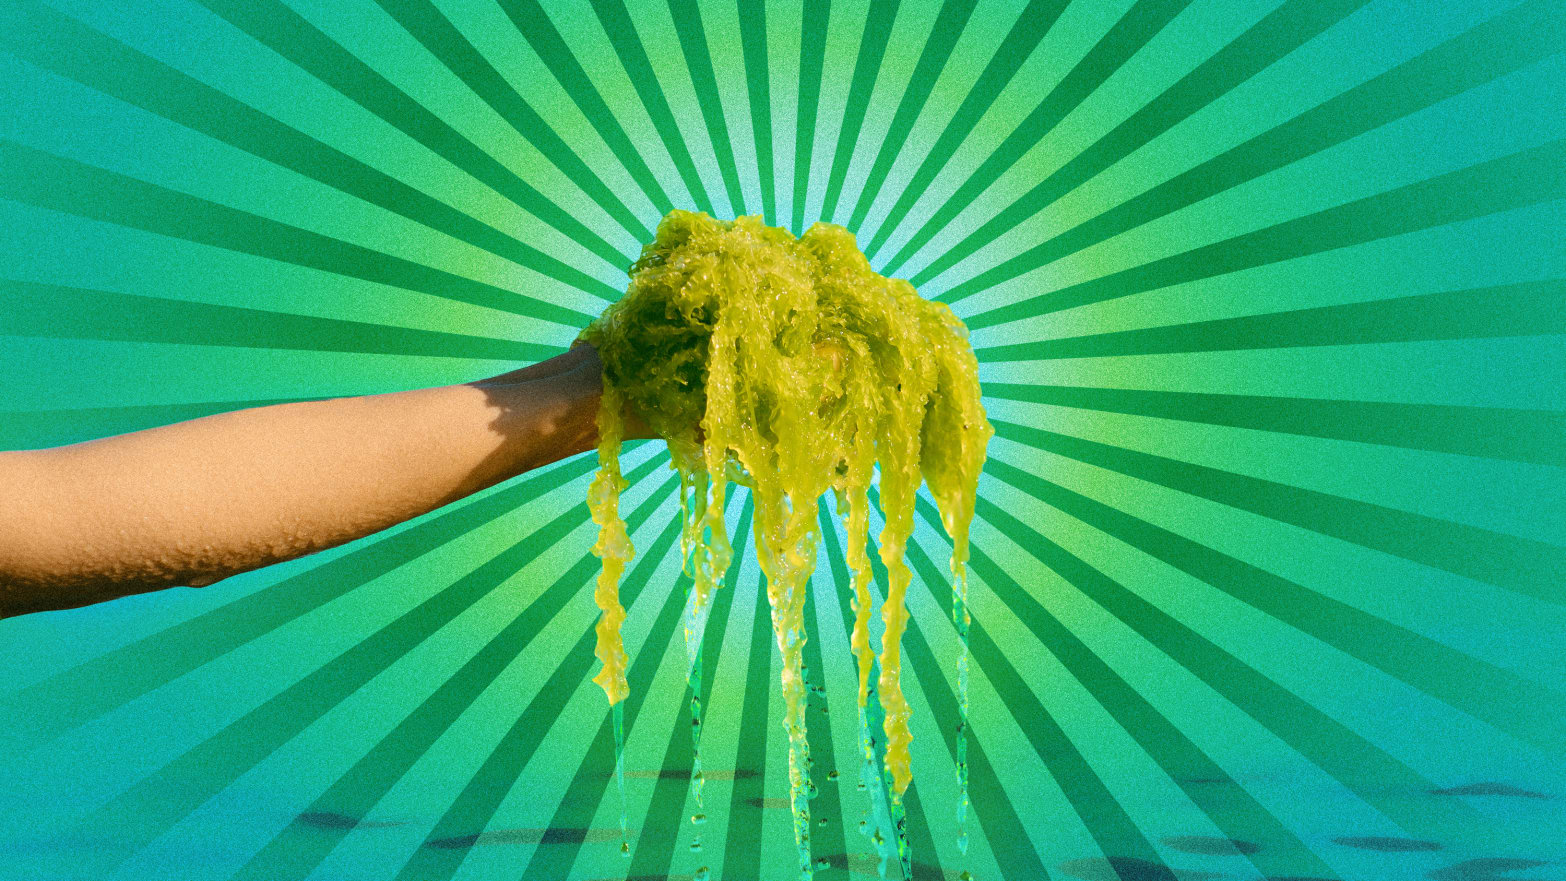 A photo illustration of a hand holding a pile of seaweed over water.